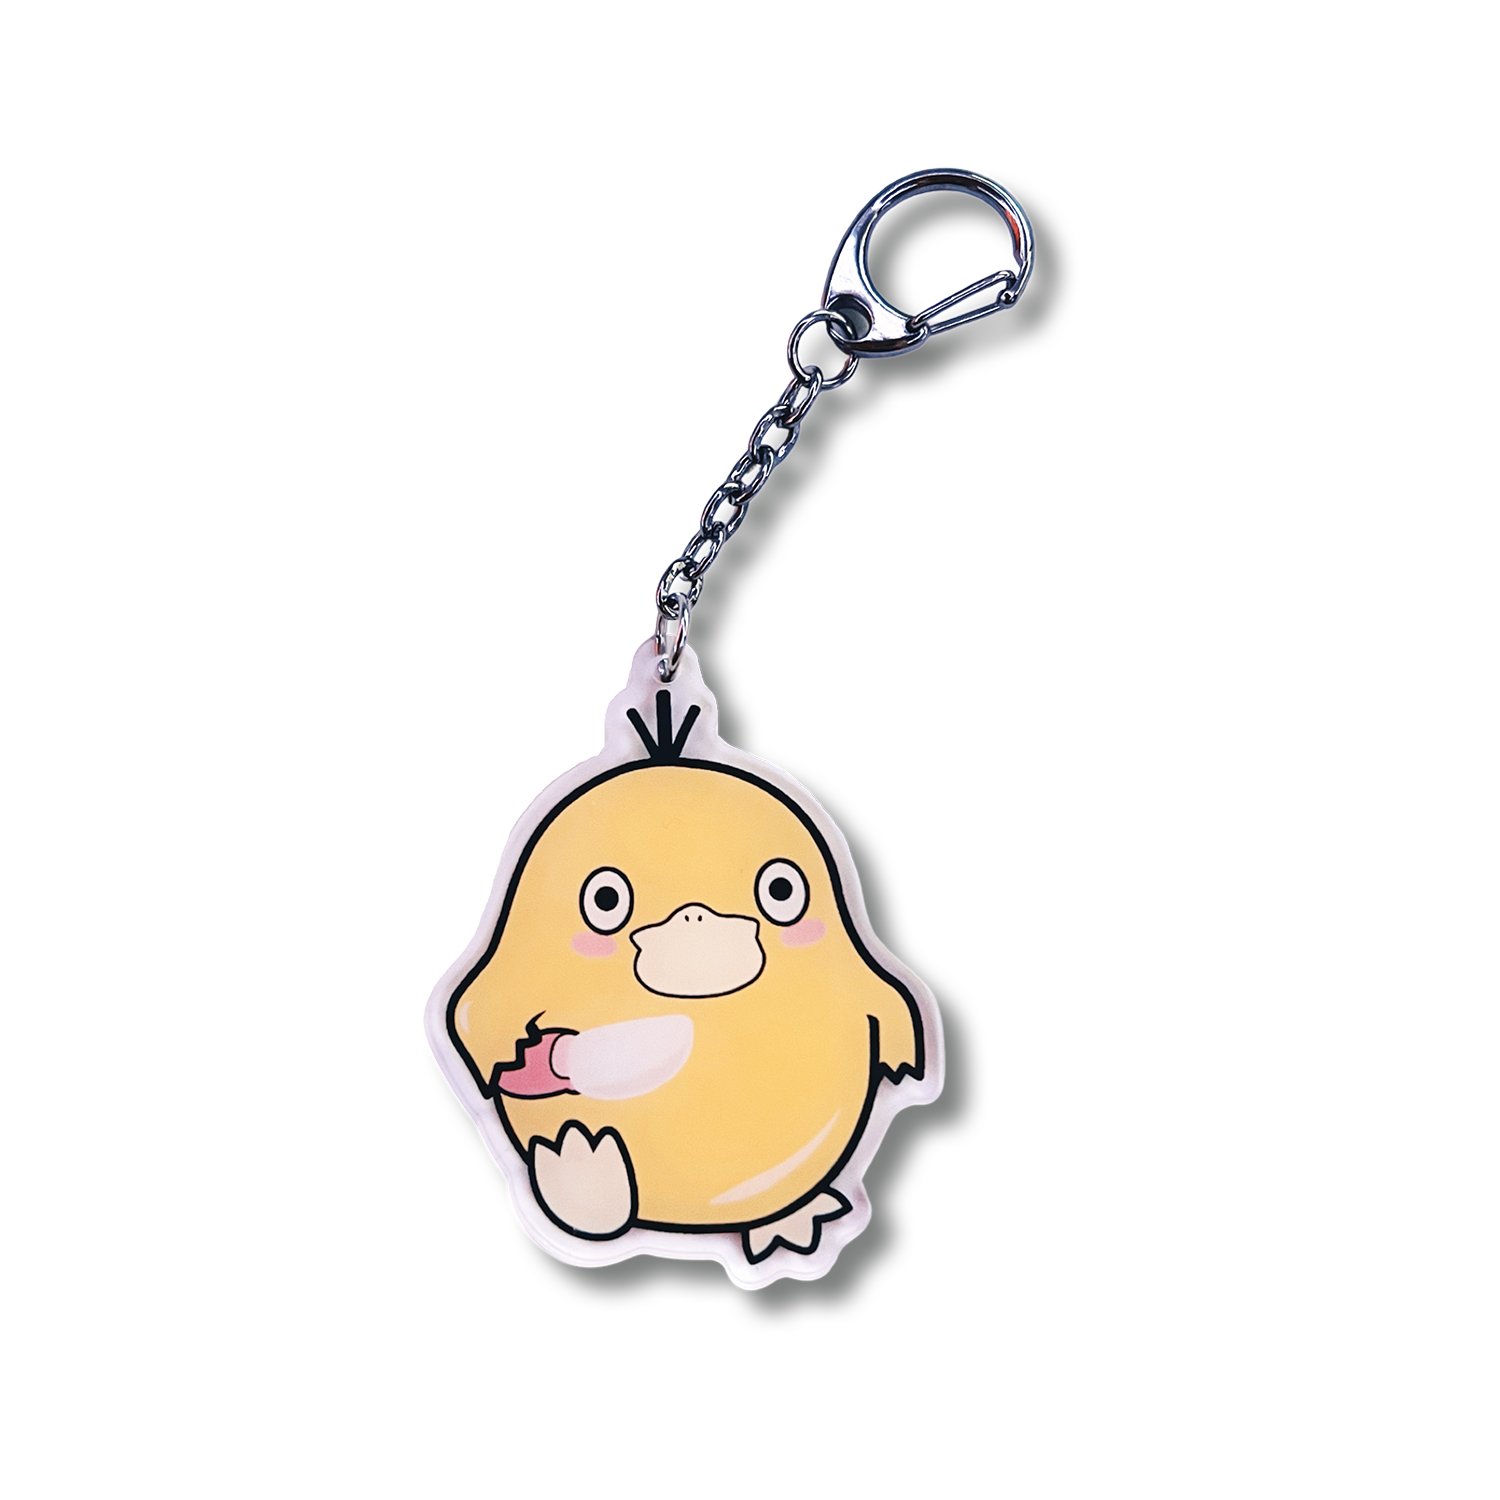 Psyduck with Knife Keychain design includes Pokemon Psyduck holding a knife on an acrylic keychain.